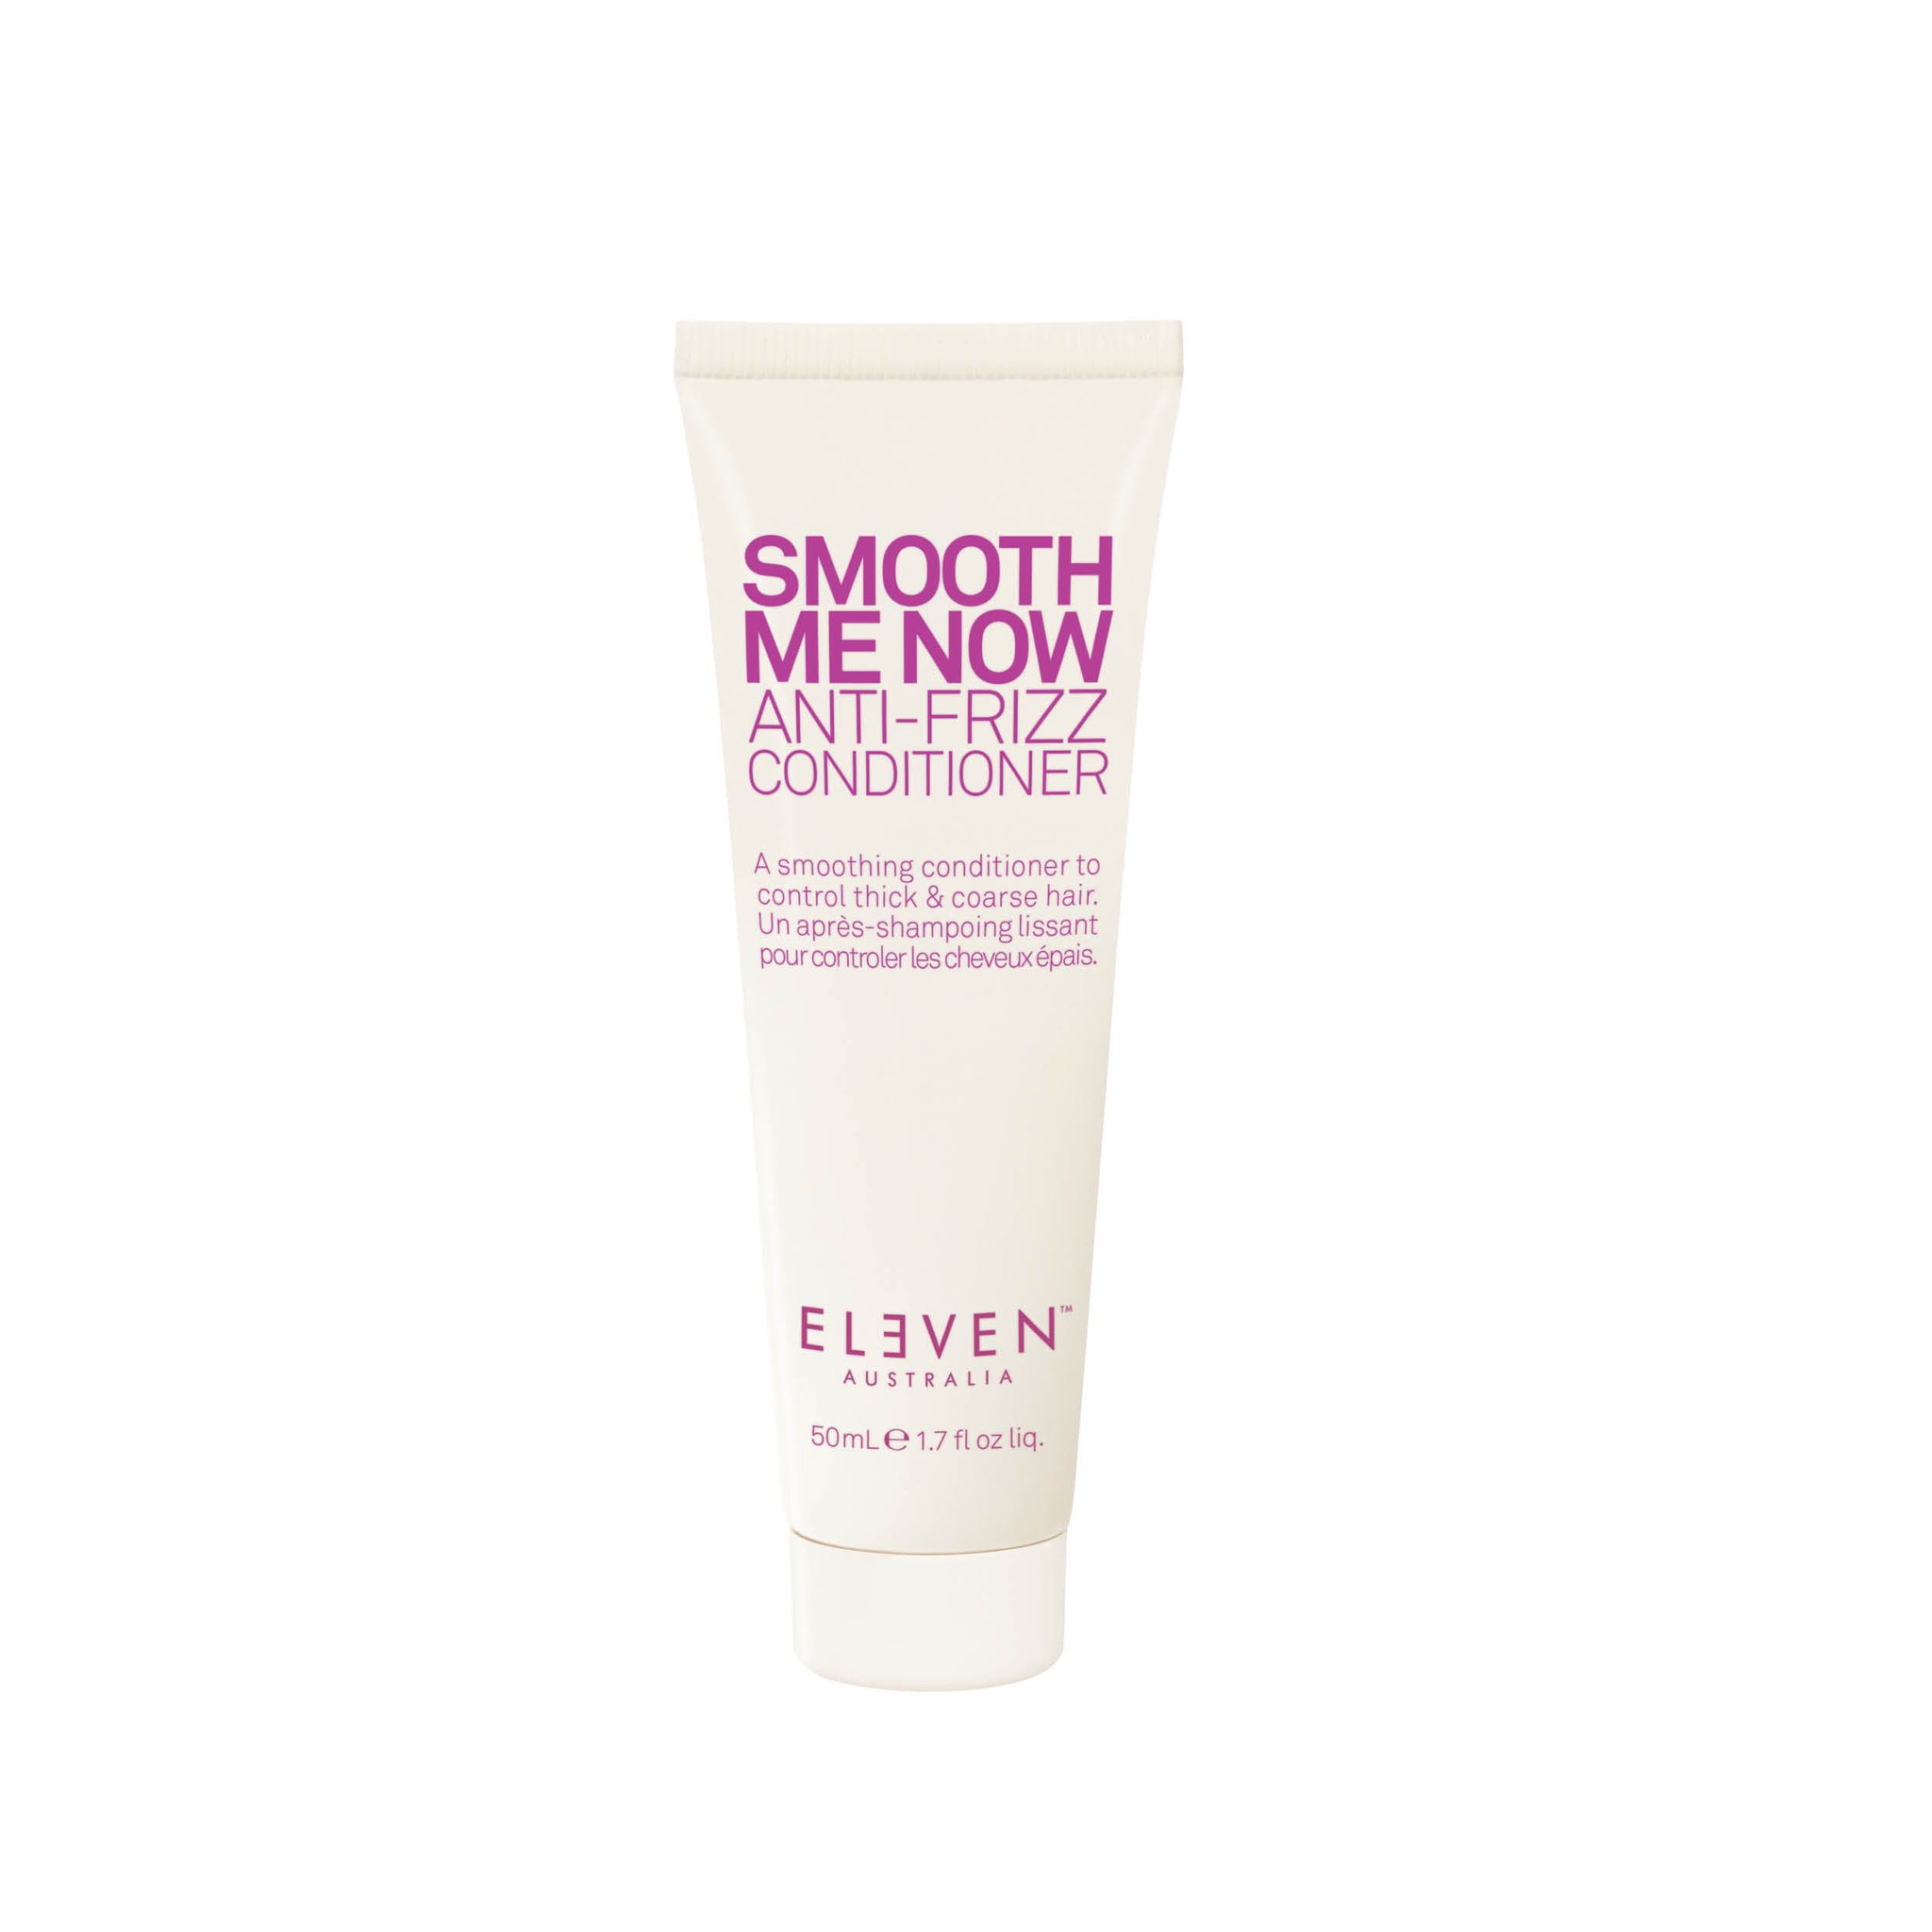 Eleven Smooth Me Now Anti-Frizz Conditioner 50ml